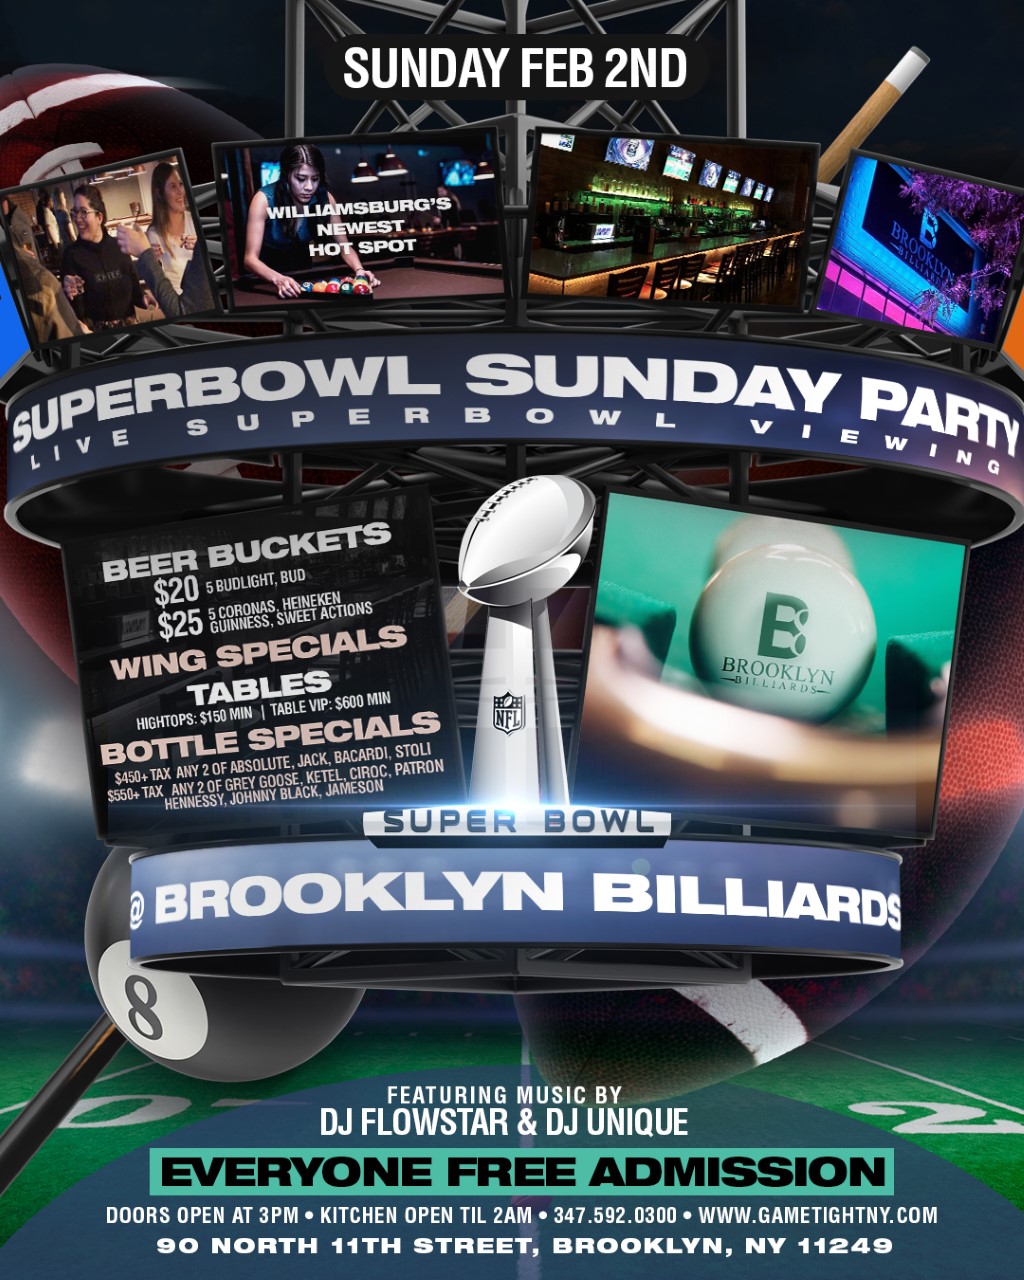 Brooklyn Billiards Superbowl Sunday Viewing party 2020 